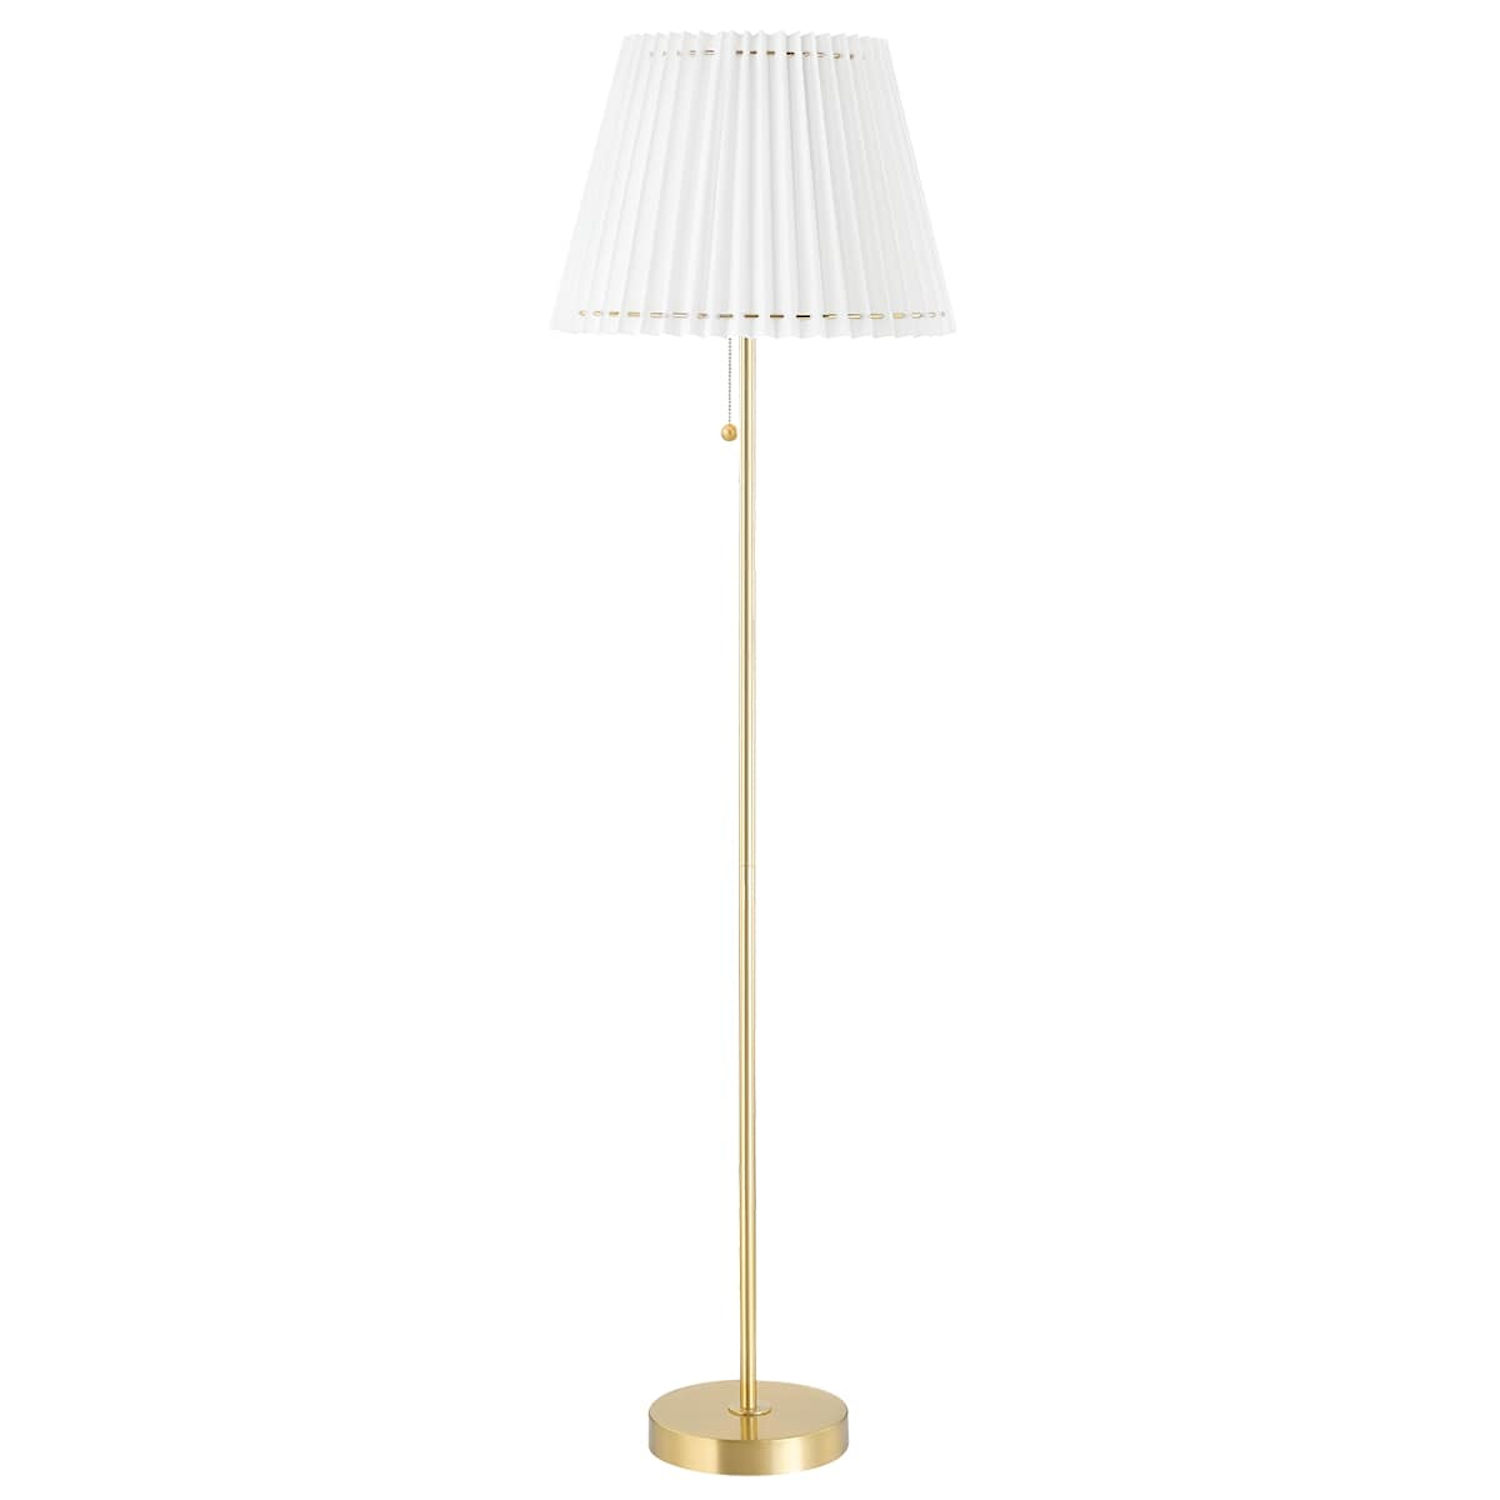 Floor Lamps Category